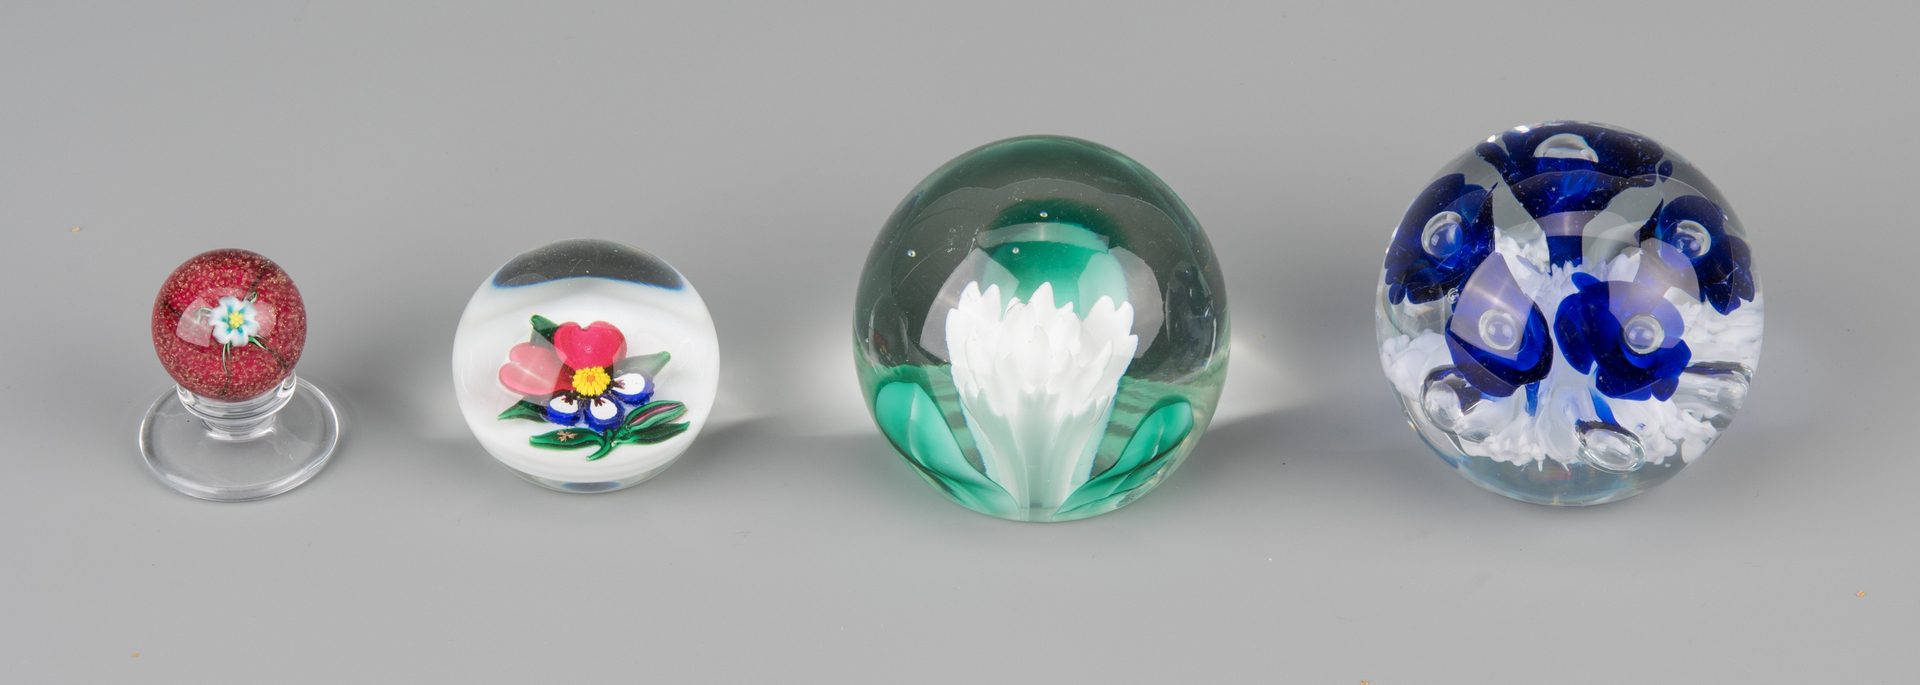 Lot 689: Group of 4 Paperweights, incl. Charles Kasiun, Jr.